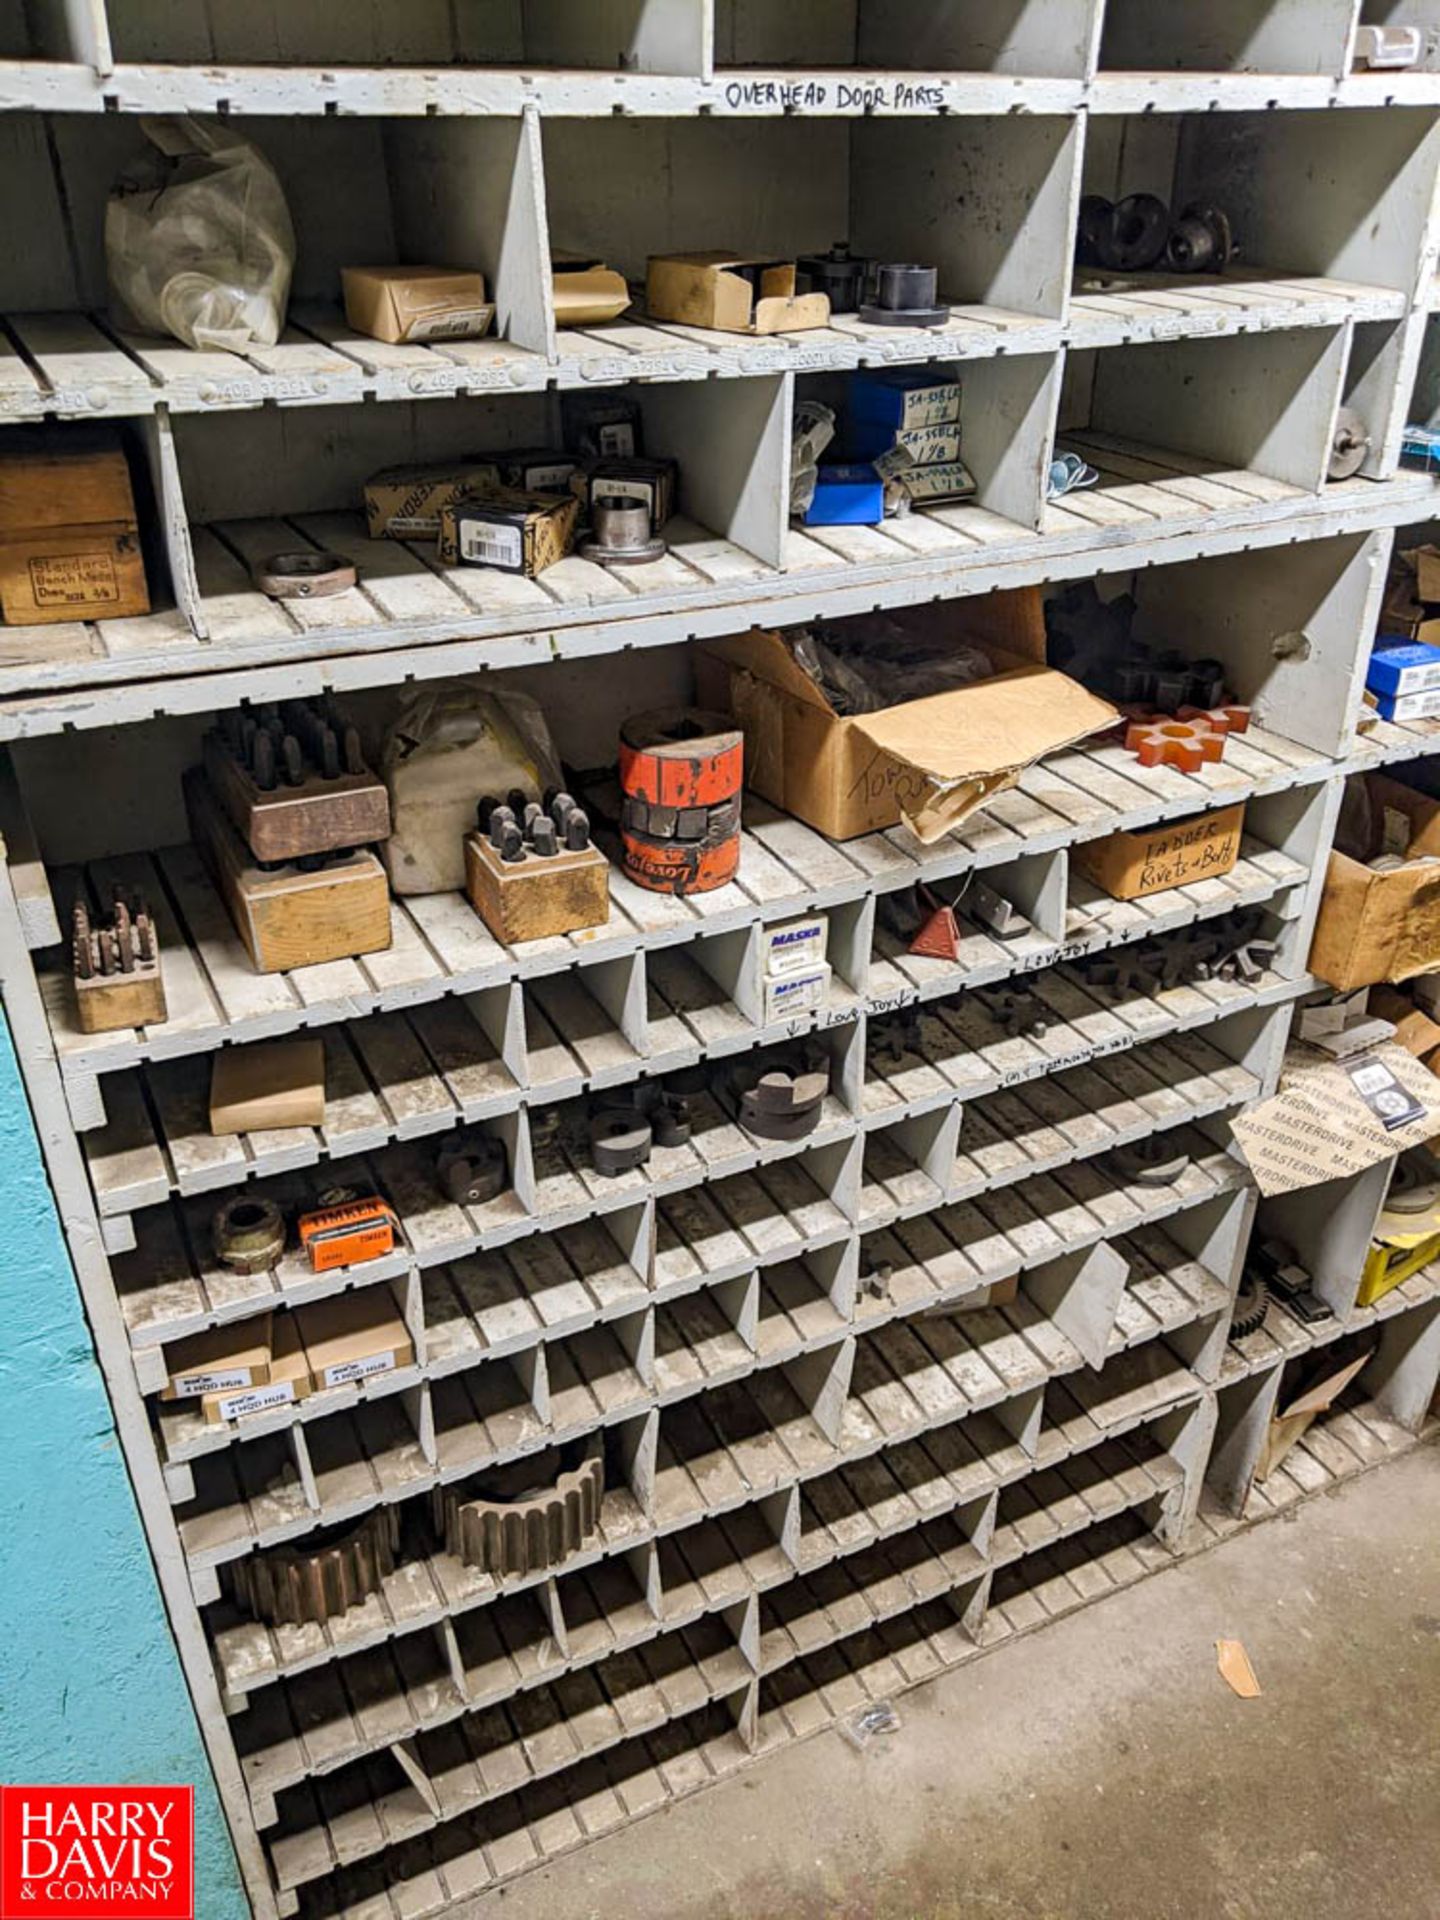 Remaining Contents of Parts Room Row to Include (6) Wooden Cubby Storage Shelves, LoveJoy Chucks, - Image 8 of 12